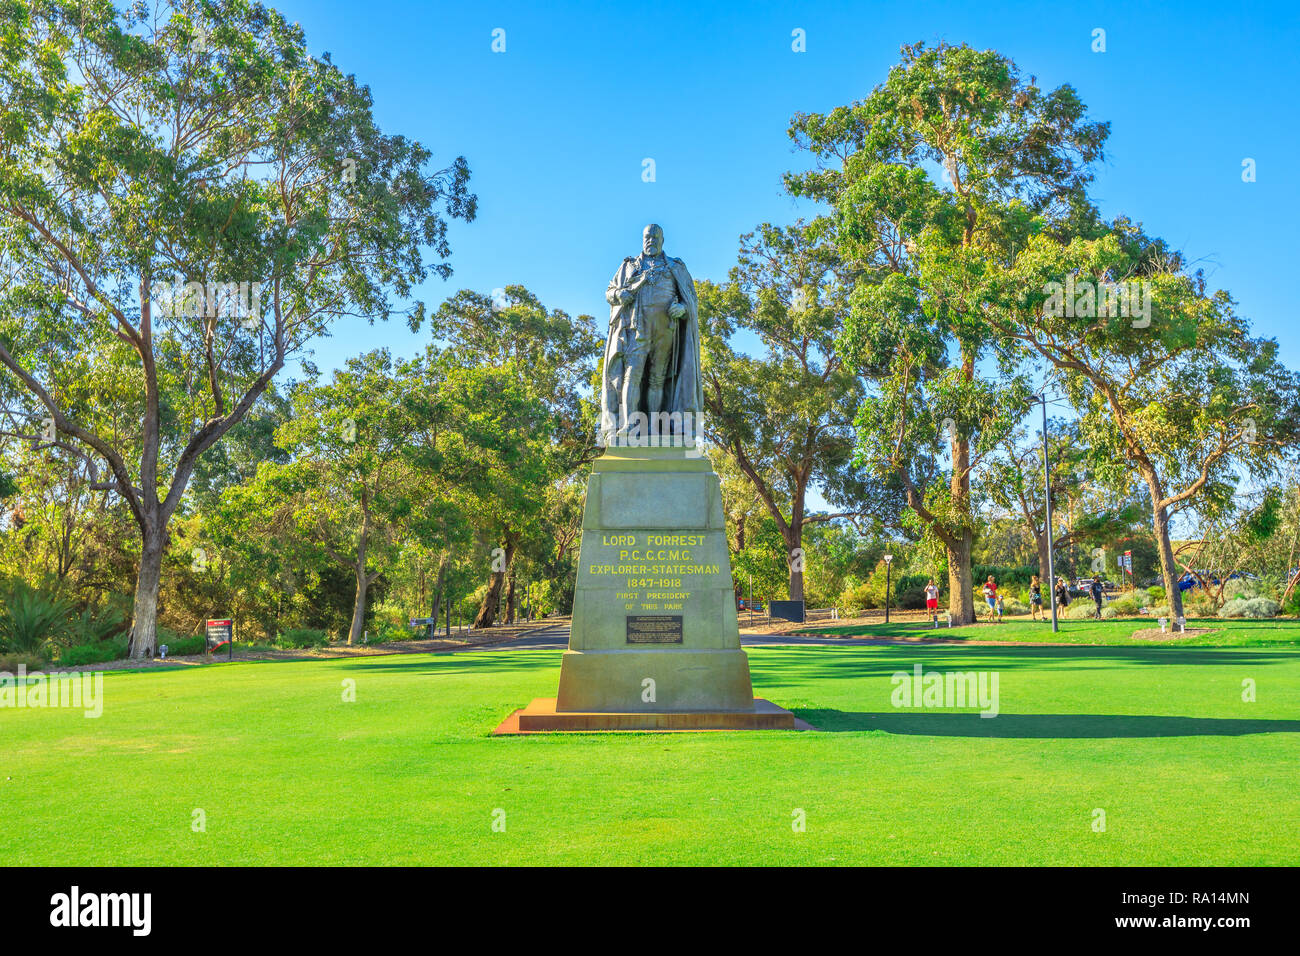 Perth, Australia - Jan 3, 2018: John Forrest statue, the first Premier of Western Australia at Kings Park, the most popular visitor destination in WA on Mount Eliza in Perth. Sunny day with blue sky. Stock Photo